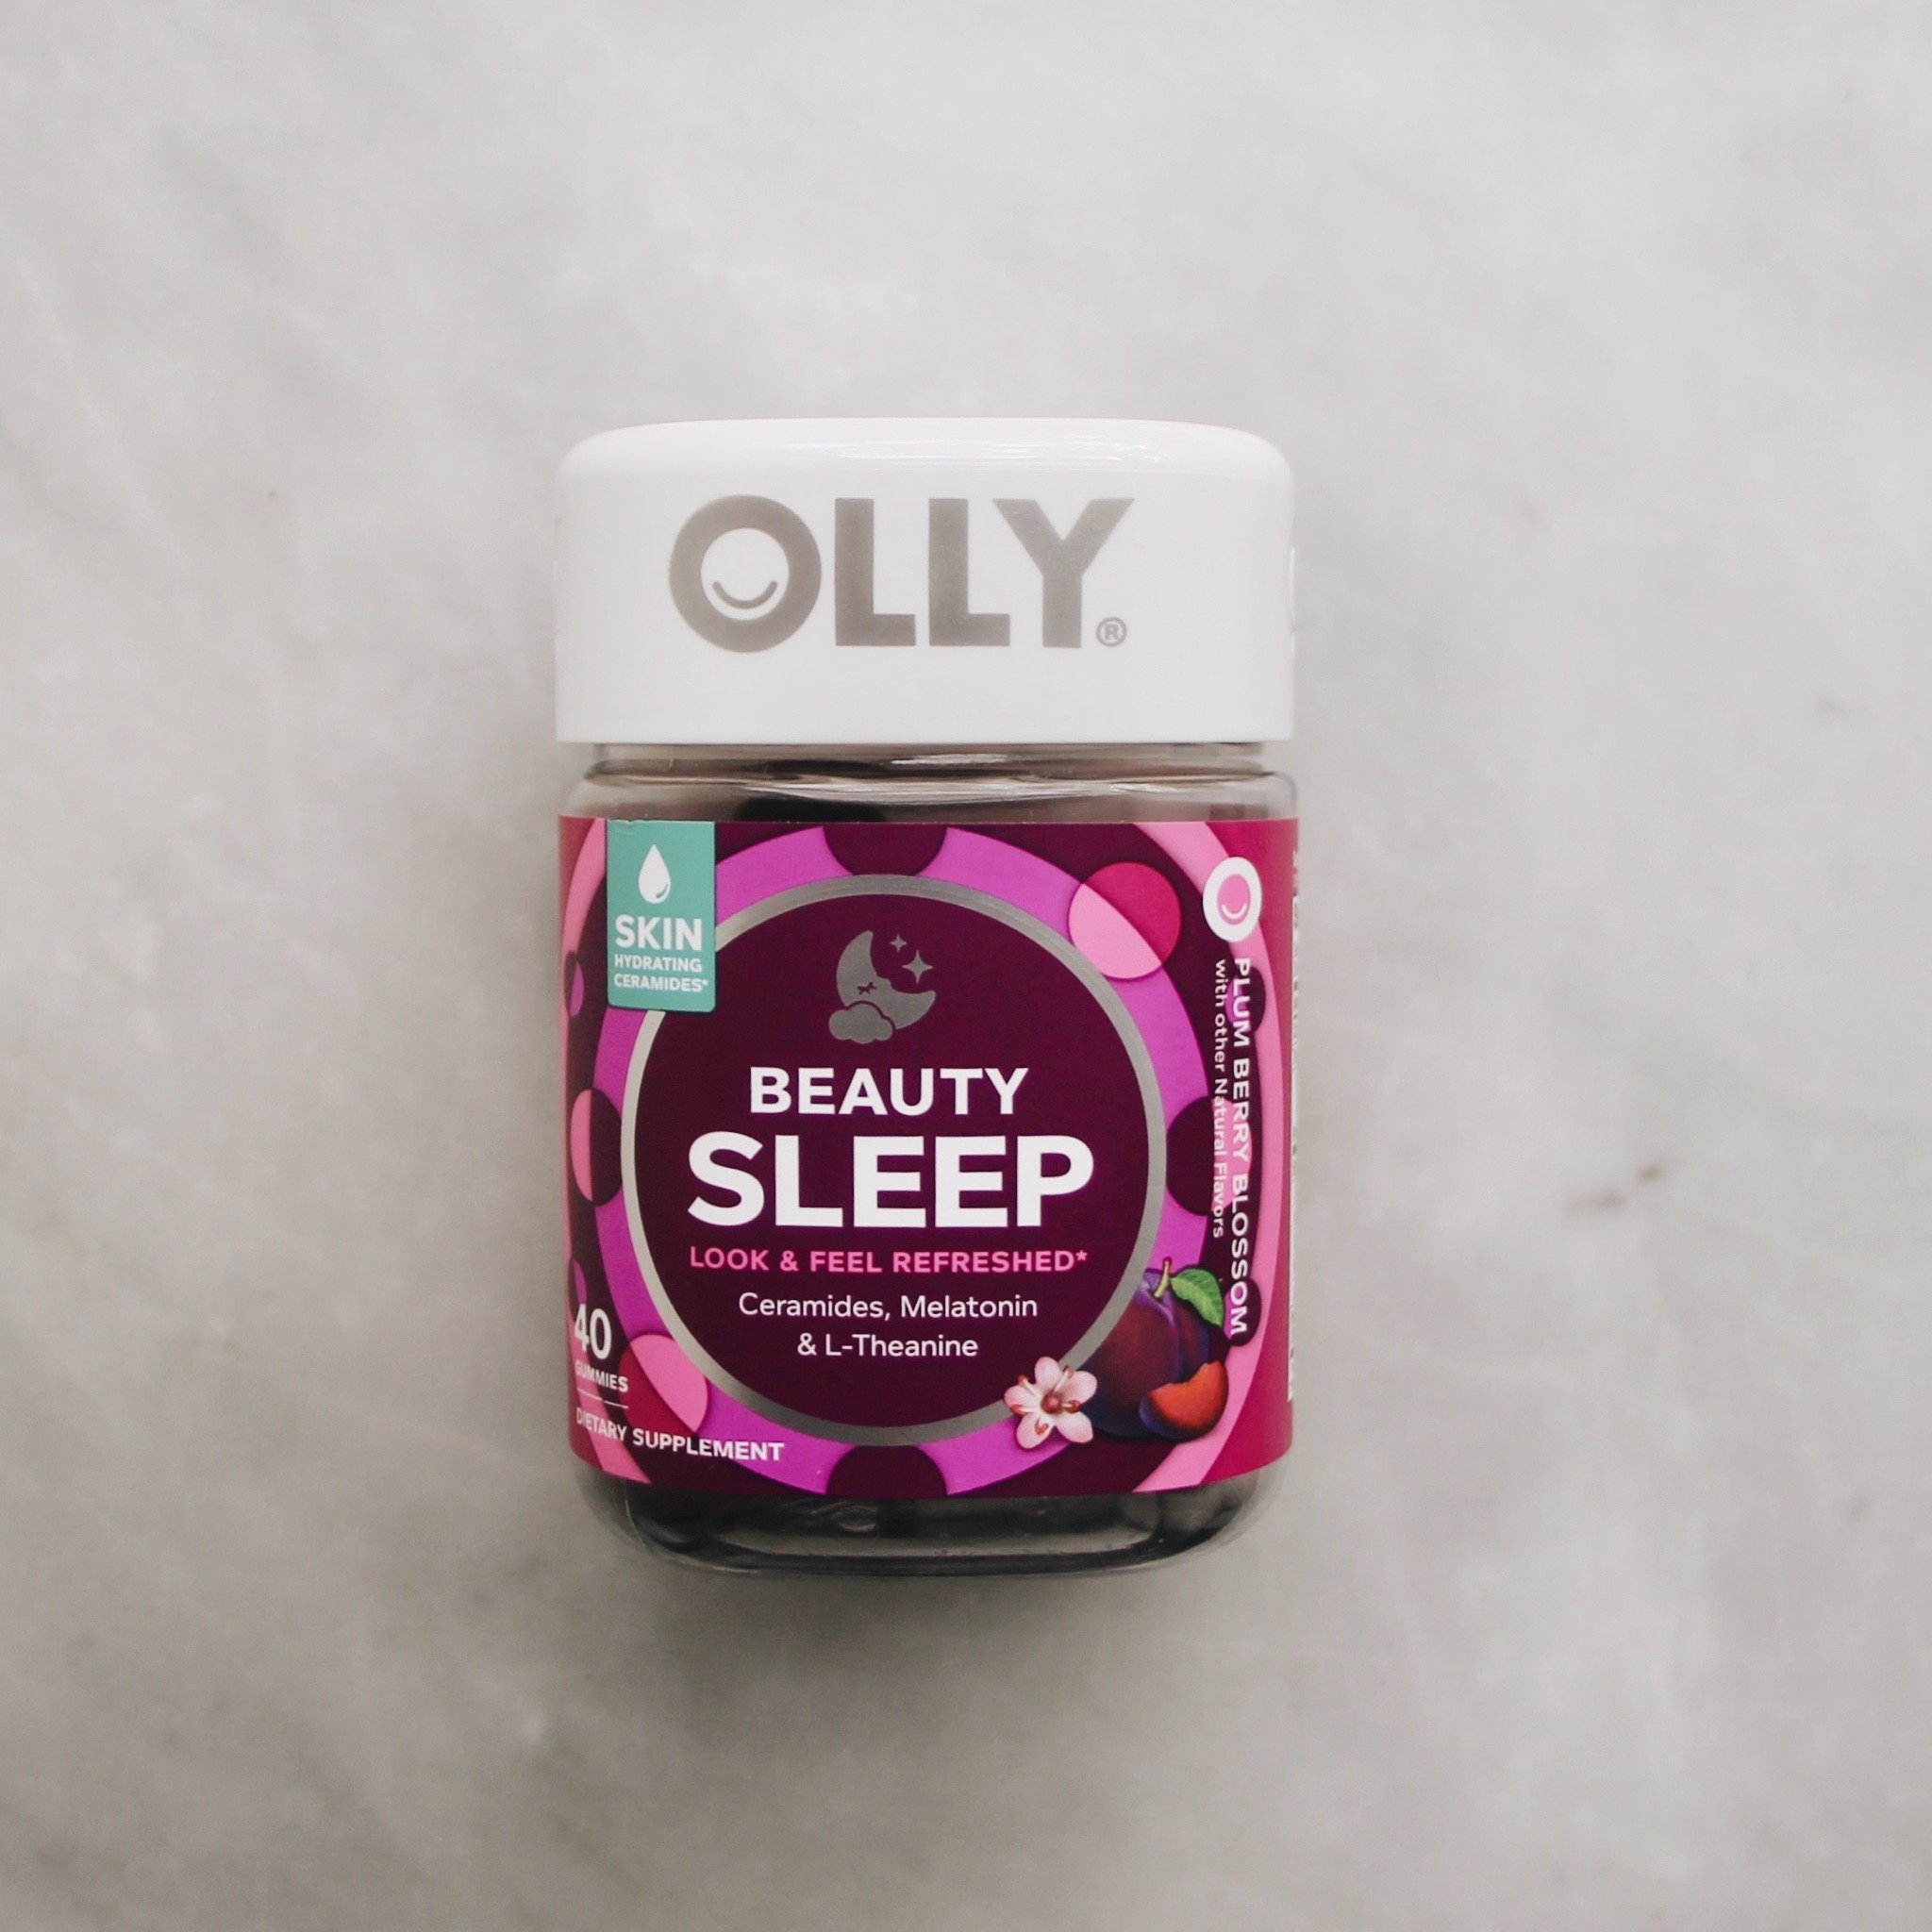 My Nighttime Routine With Olly Nutrition Beauty Sleep, Skincare Routine, Evening Skincare Routine, Bedtime Routine, Olly Nutrition, Beauty Sleep Gummies